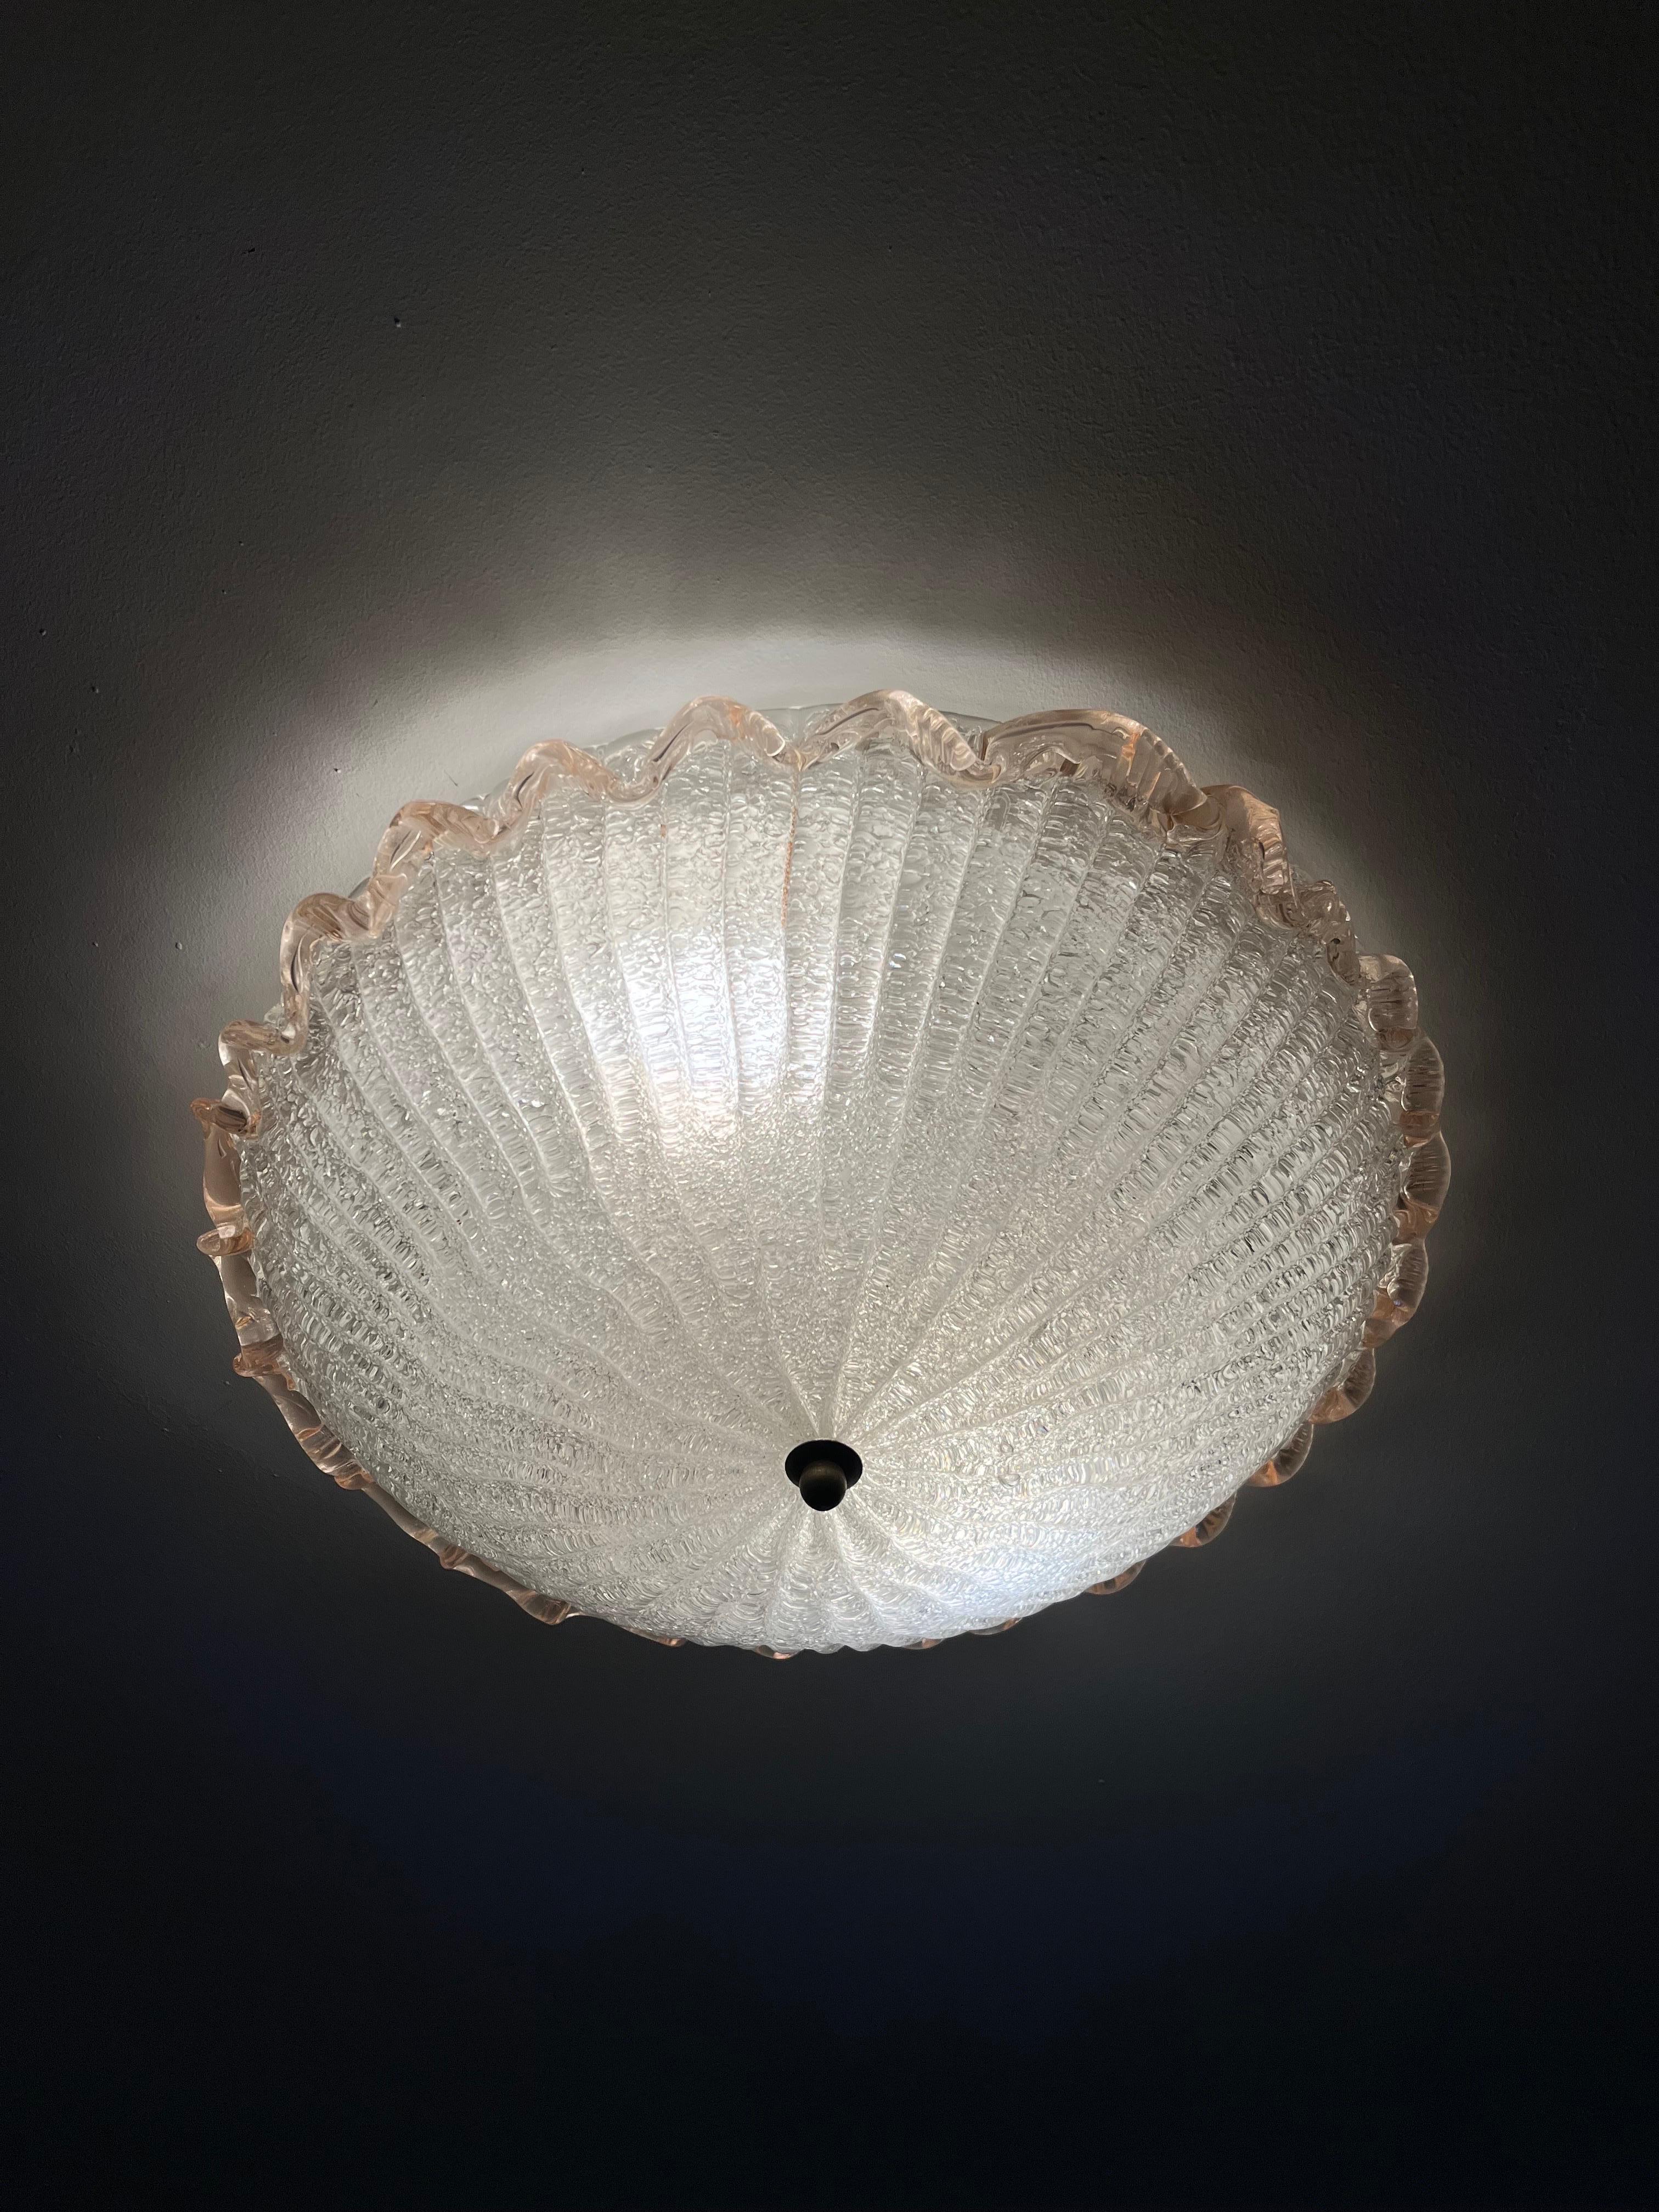 1950s Val Saint Lambert flush mount ceiling plate is white metal with 2 Edison sockets the shade is a dome shaped glass with glass flakes on the inside of the dome which gives an effect in the glass the outer rim is pink wavy glass and details in